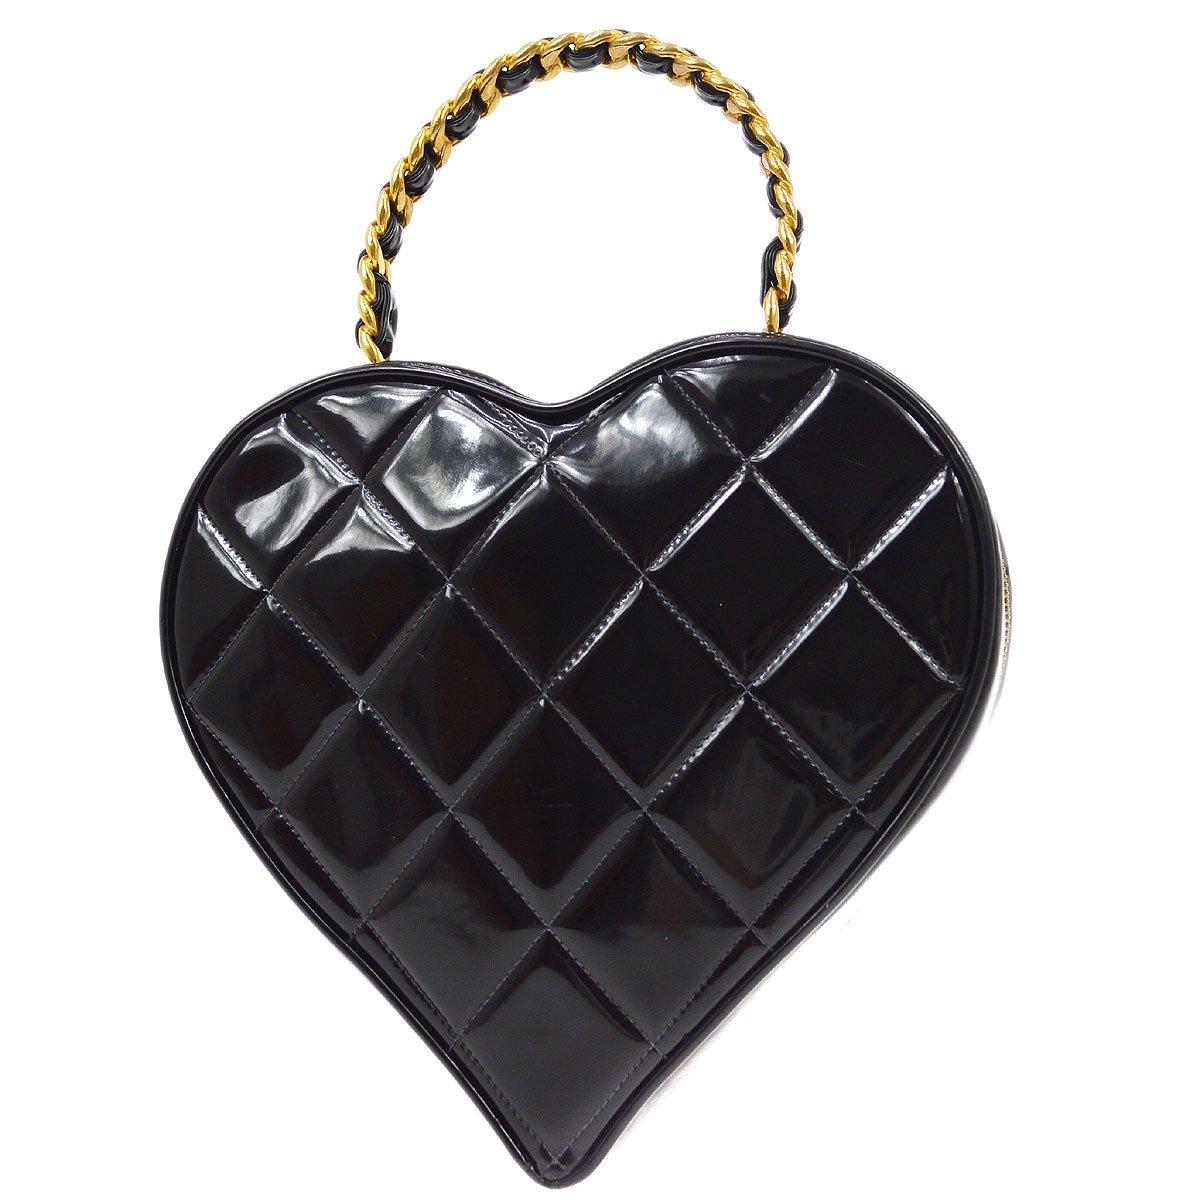 Chanel Jumbo CC Heart Cosmetic Vanity Hard Bag Black Patent Leather

Additional information:
Material : Patent Leather
Color: Black, White
Pocket: Inside: Pocket*1
Accessories: Authenticity Seal(scuffed and minor peeled)
Size(Inch): W 9.1 